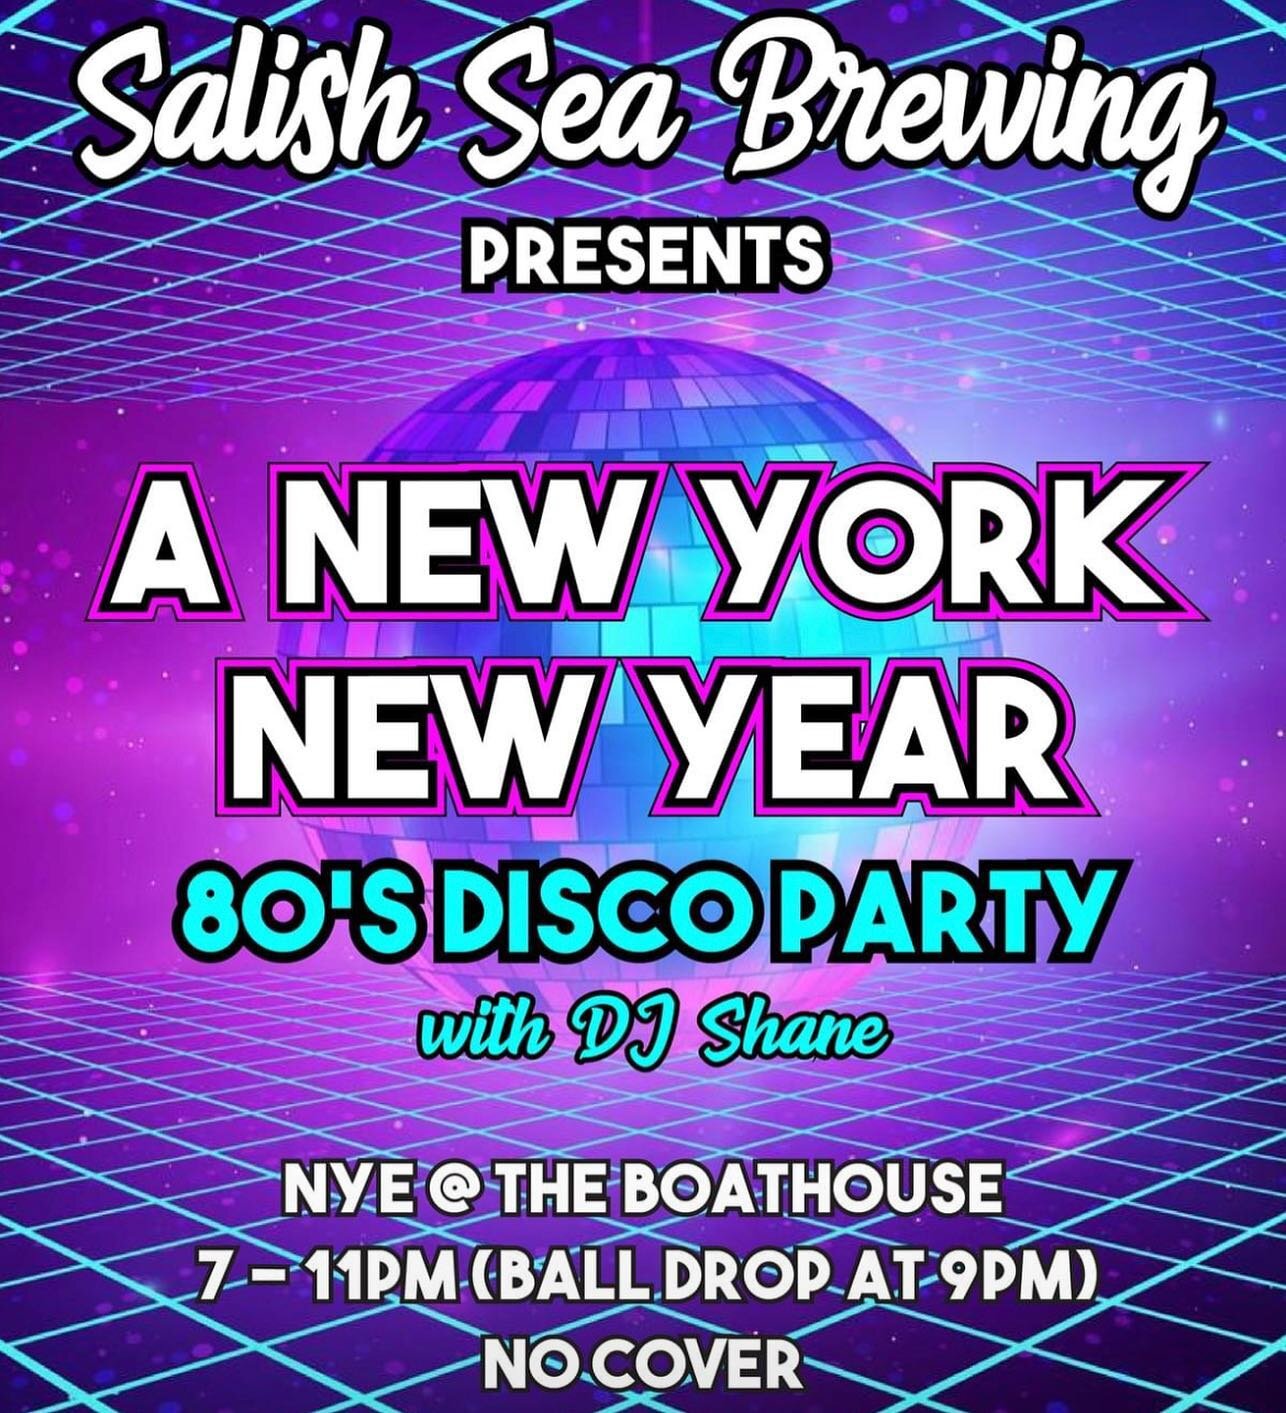 Join us at The Boathouse on NYE as we welcome in 2024!